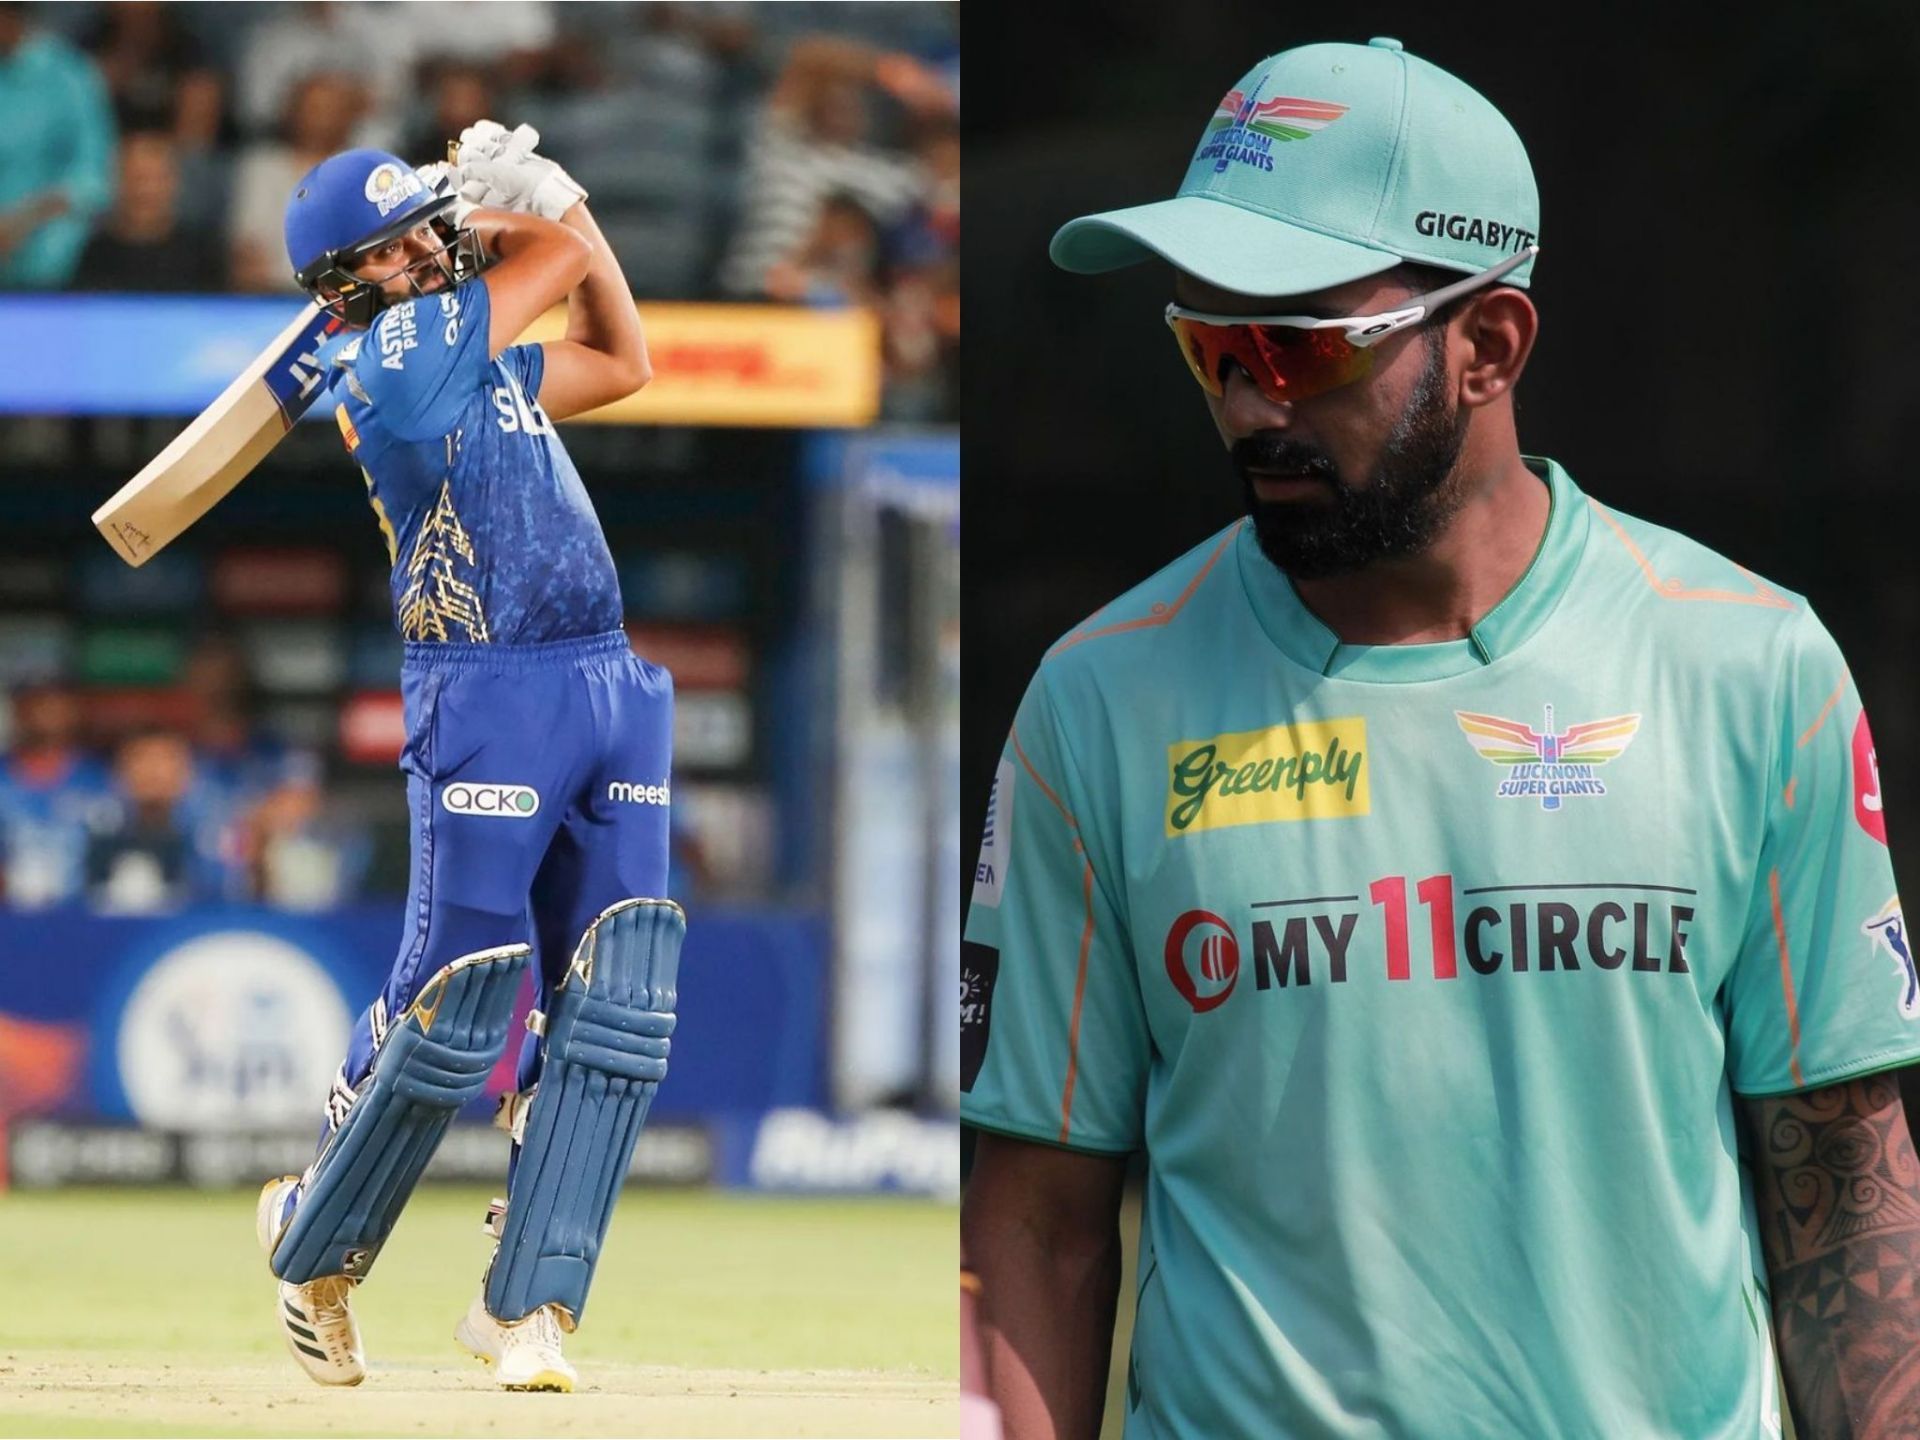 Both Rohit Sharma (L) and KL Rahul (R) will be keen to notch up their first big score of the IPL 2022